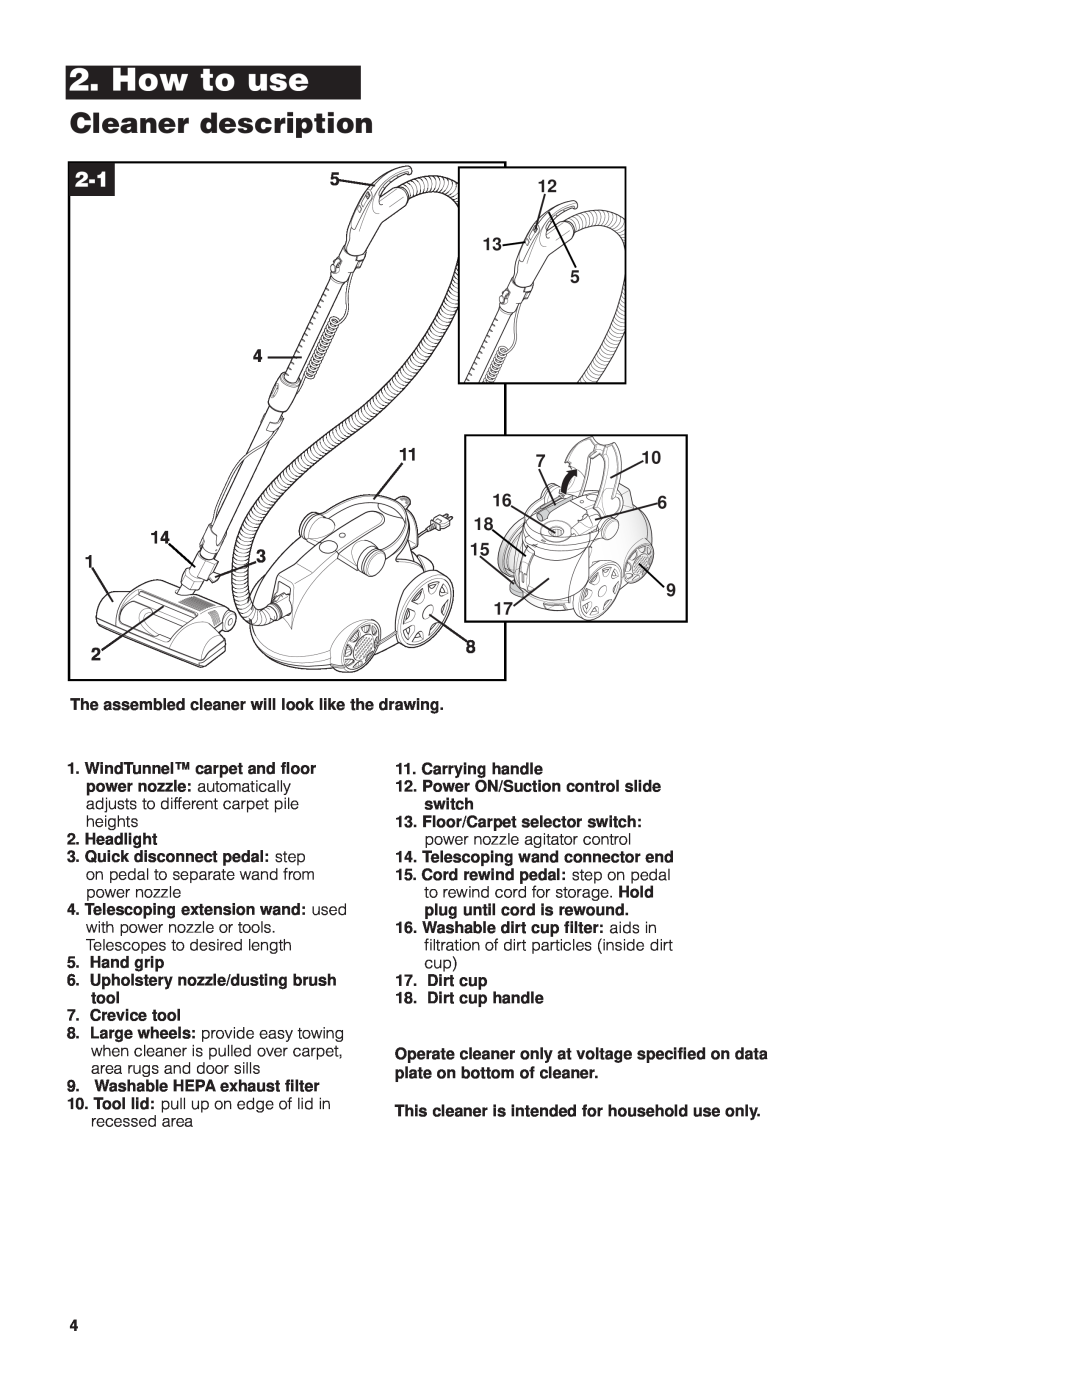 Hoover S3755050 owner manual How to use, Cleaner description, The assembled cleaner will look like the drawing, Headlight 